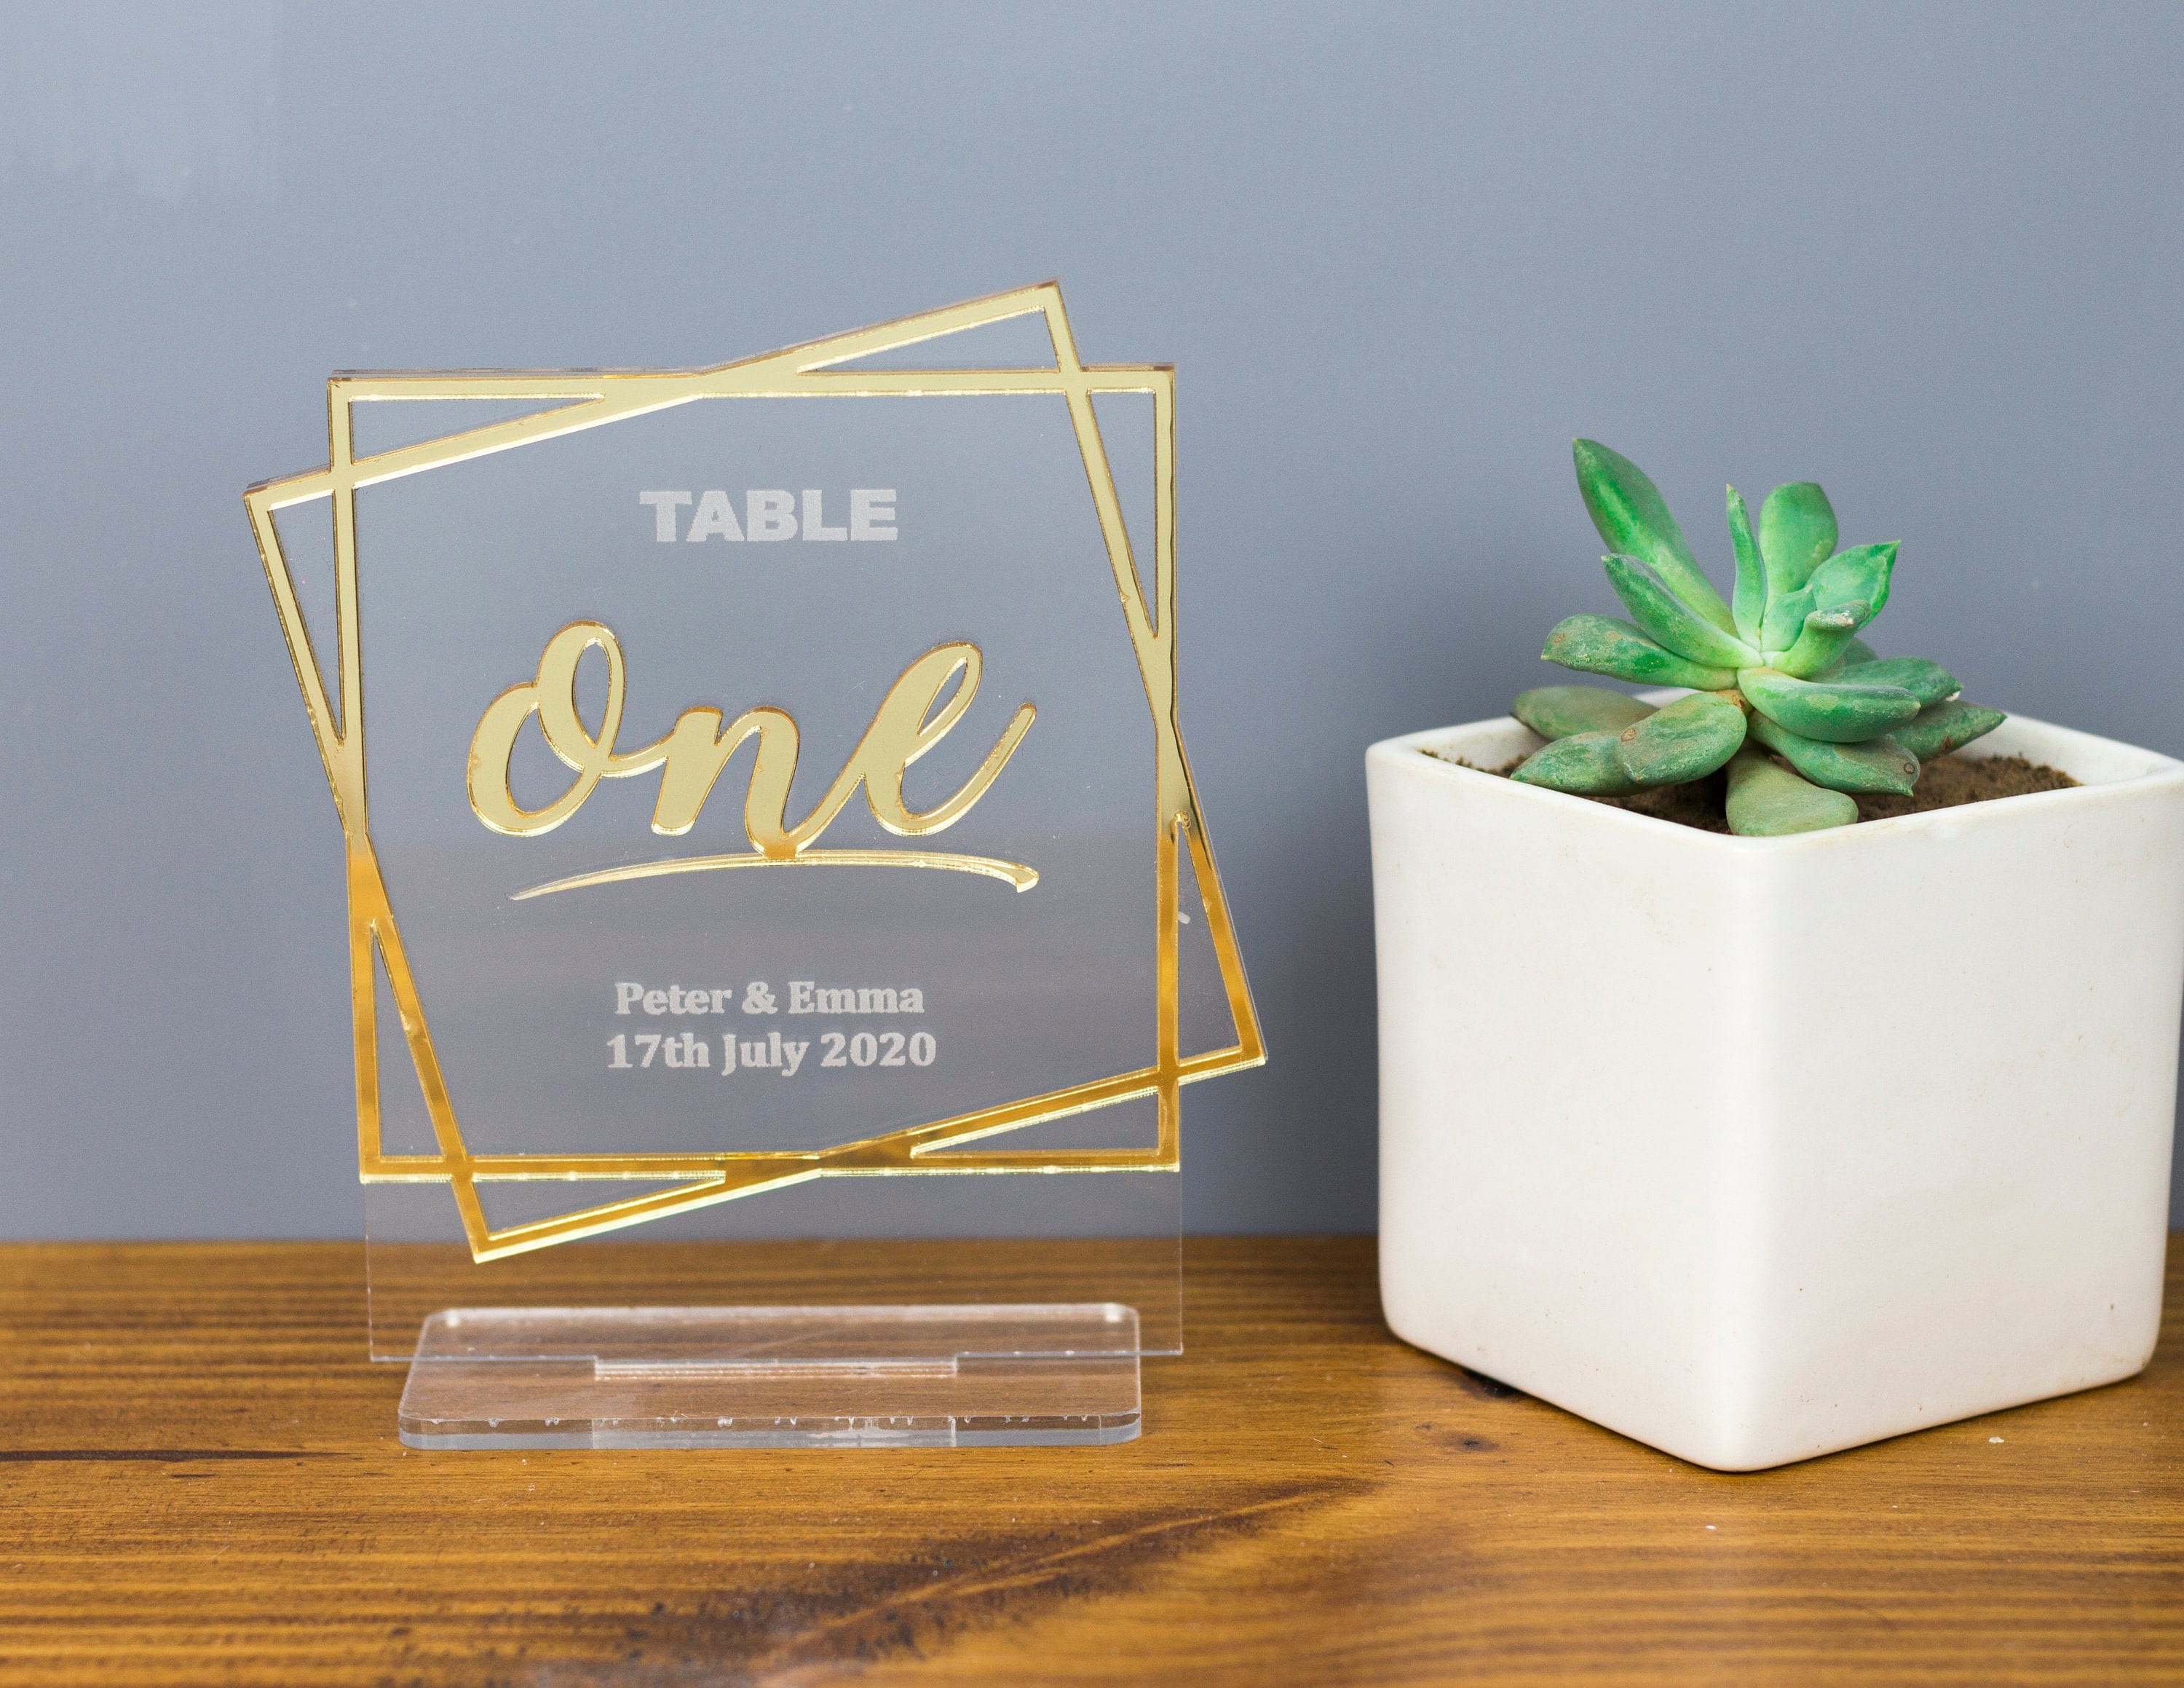 Gold Table Numbers | Table Numbers | Acrylic Table Numbers | Table Number Wedding , Centerpieces Luxury Decorations, Wedding Table Number